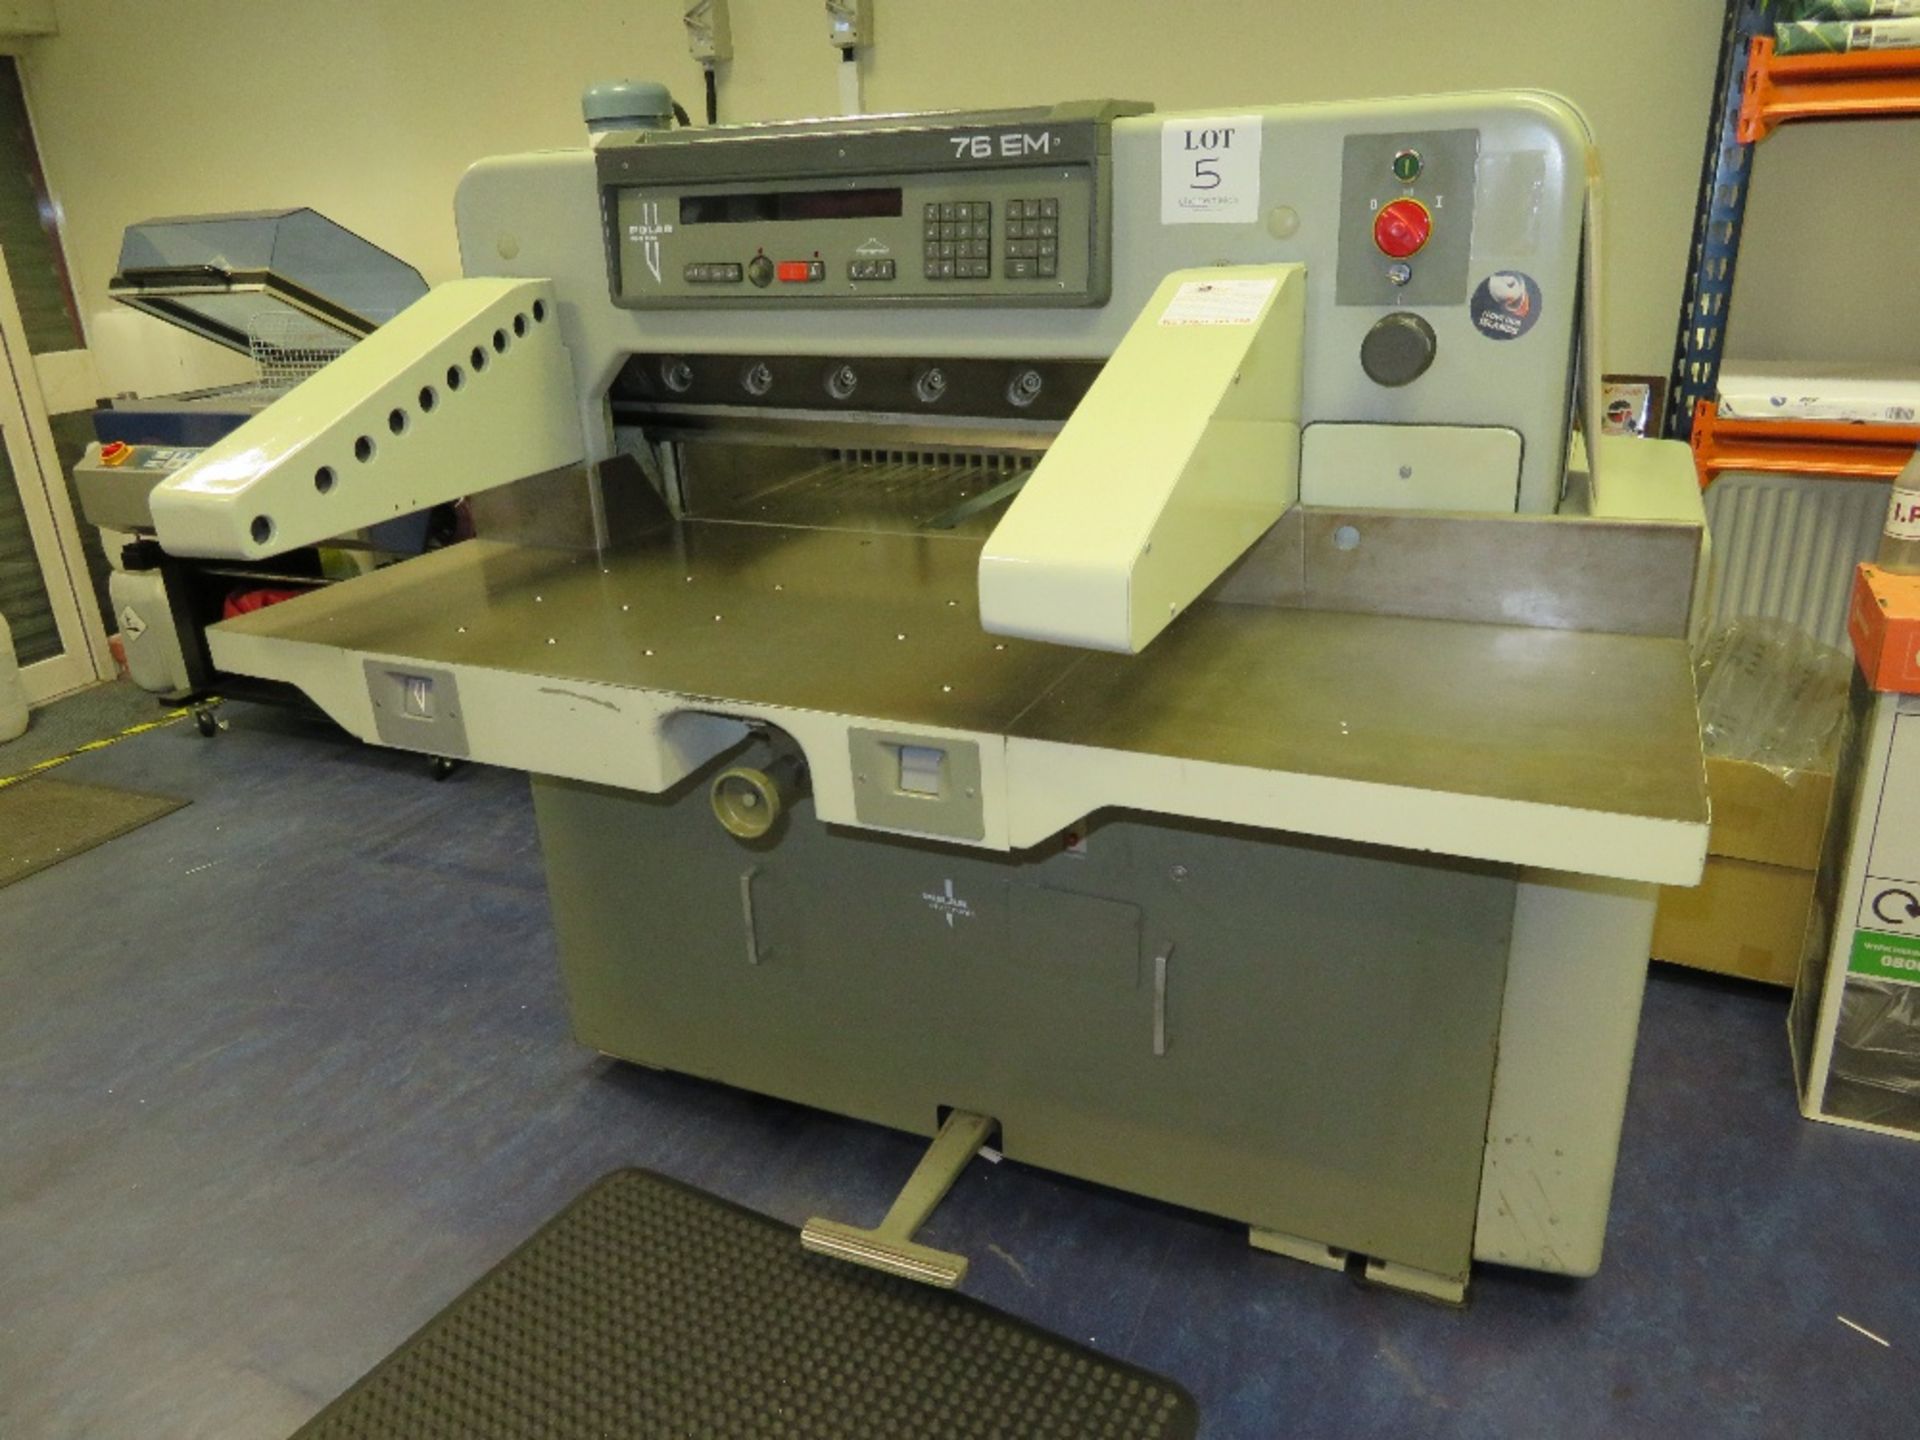 Polar Mohr 76 EM Paper Guillotine, Serial Number 5661976 with Light Guards and 4x Spare Blades